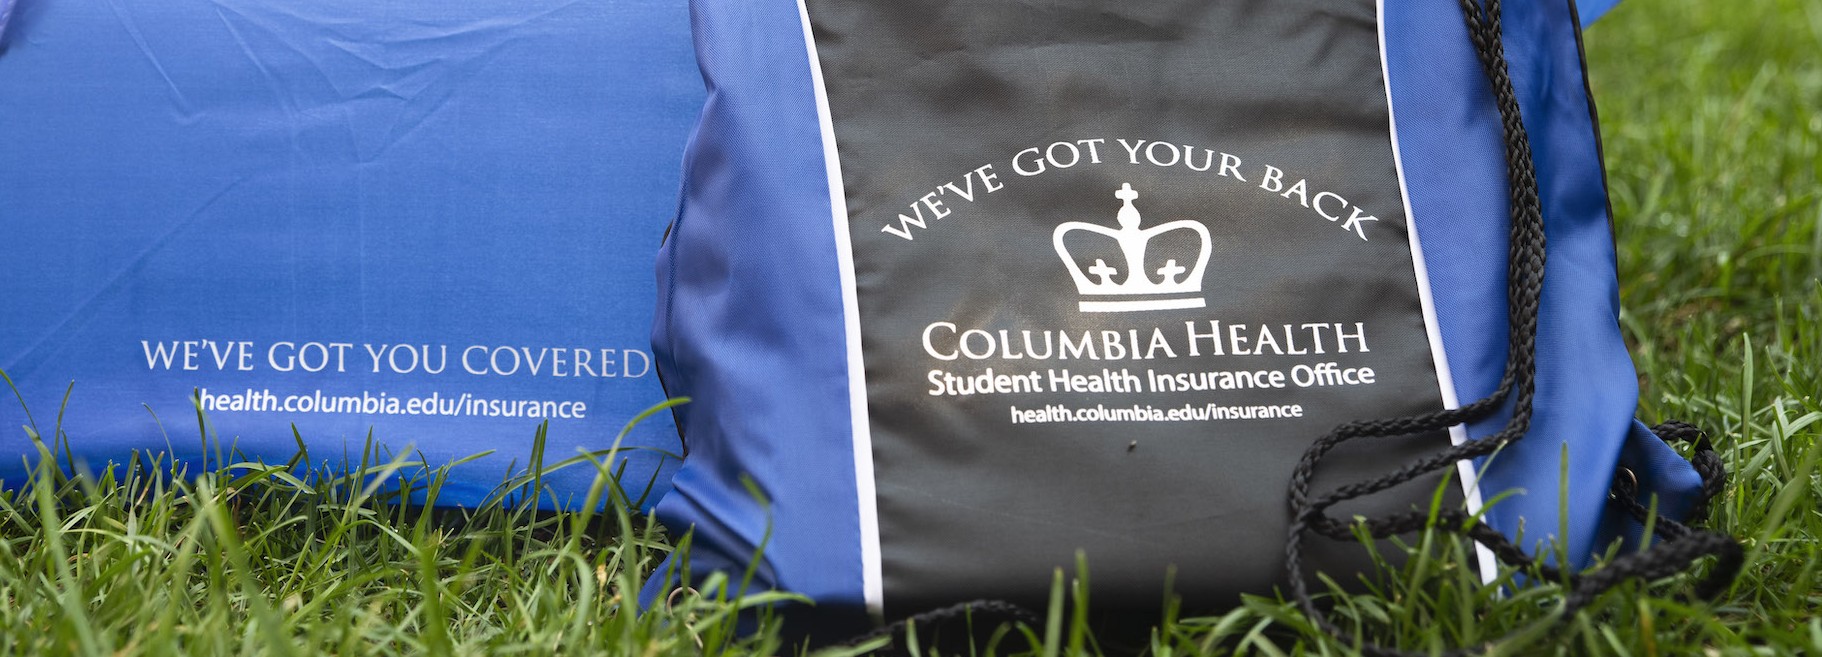 Photo of umbrella with text "We've Got You Covered" and backpack with text "We've Got Your Back"